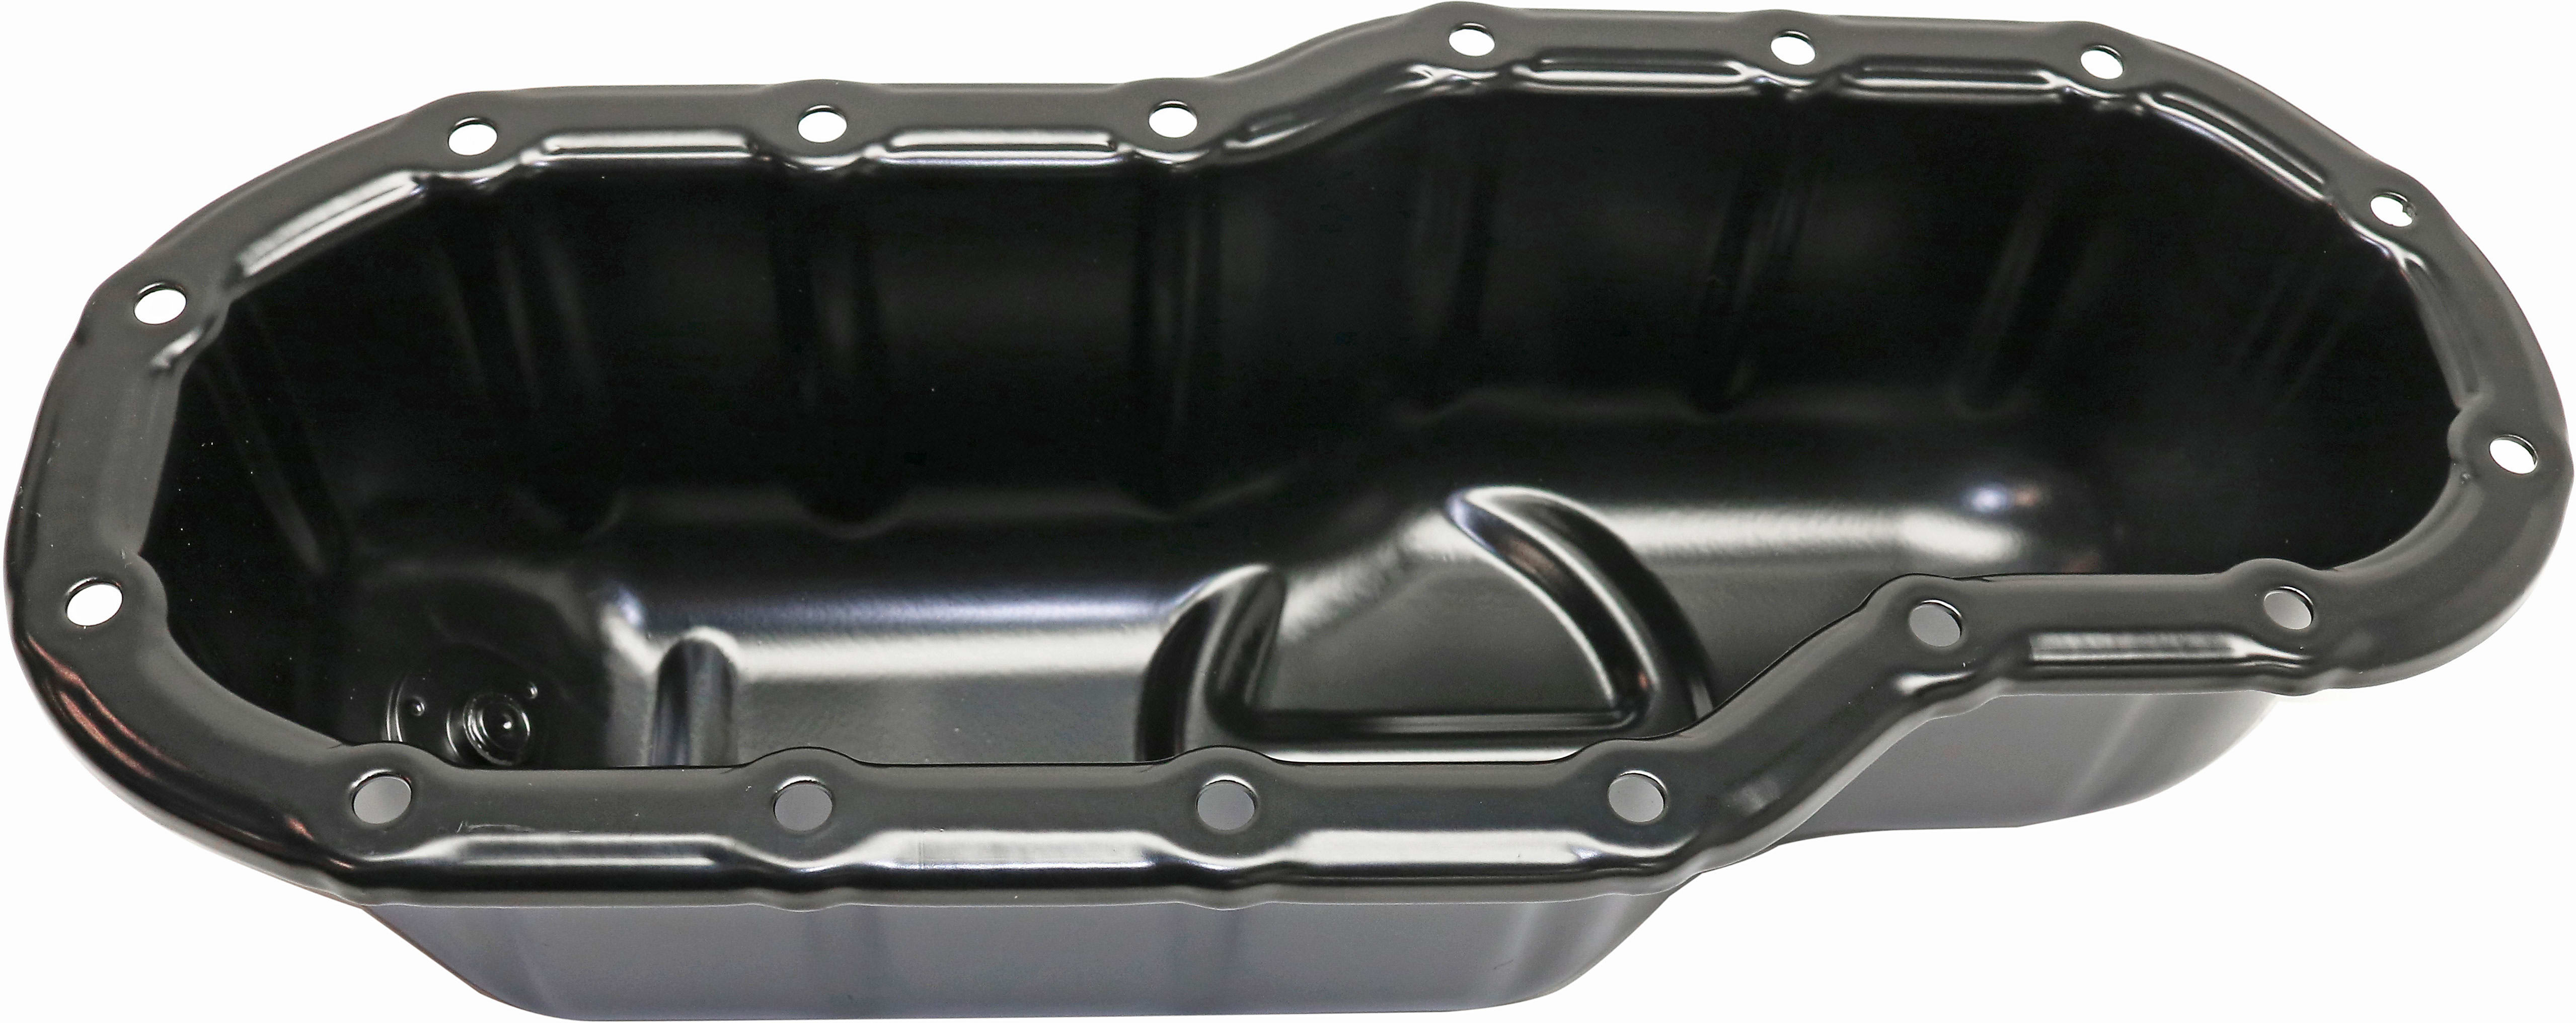 2014 Toyota Tundra Oil Pans from $24 | CarParts.com